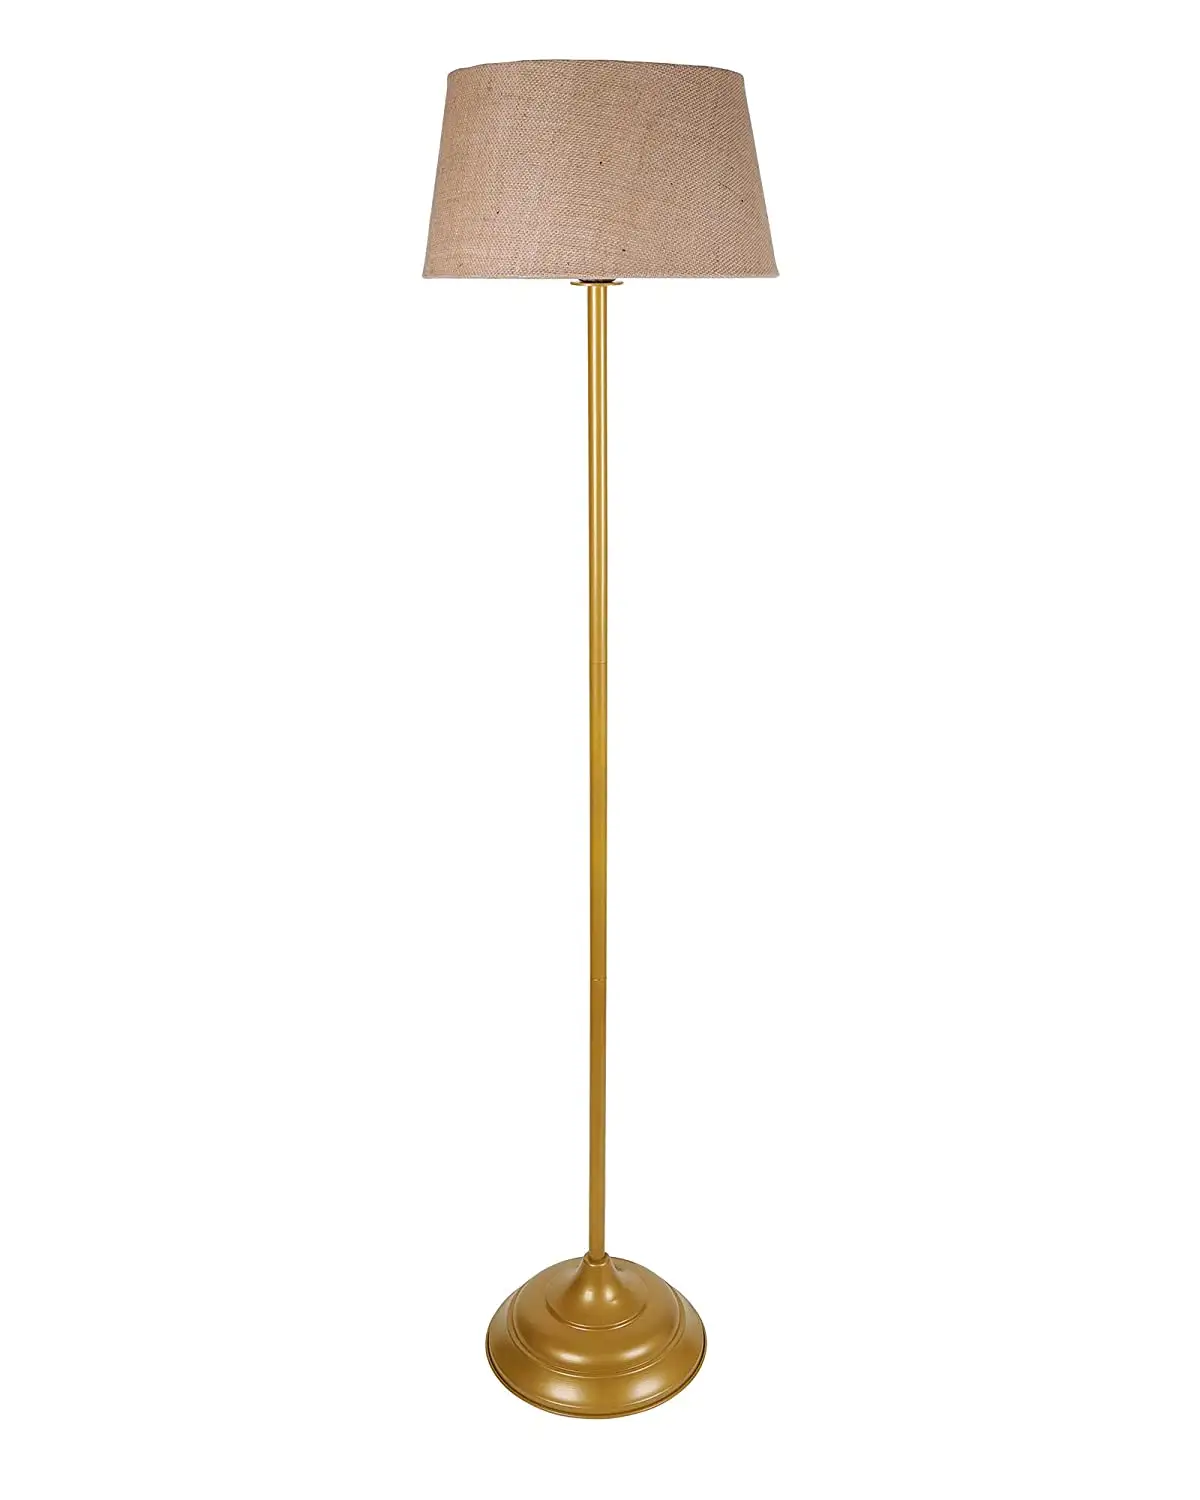 Simple Shaped Large Floor Lamp With White Fabric Shaped Living Lighting Decorative Gold Powder Coated Floor Lamp